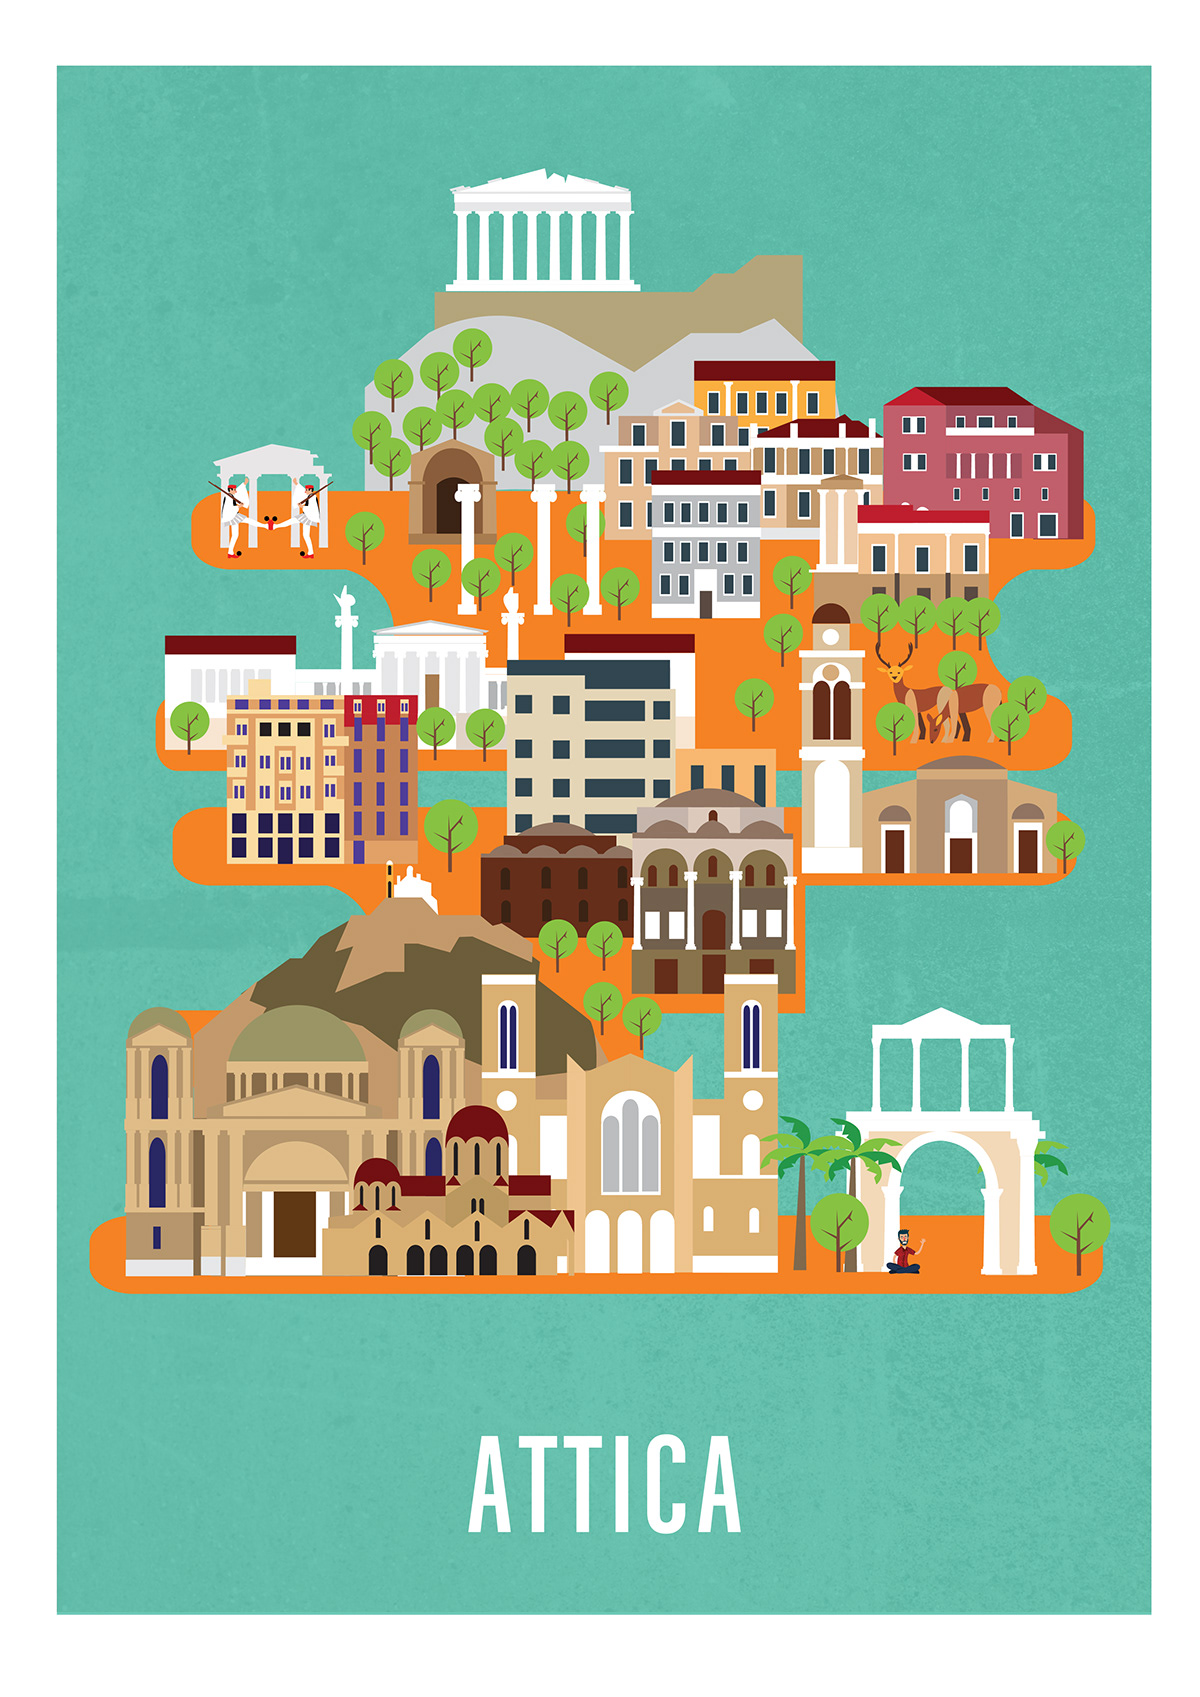 Greece map Promotion tourism gif athens THESSALONIKI islands cards Website poster monuments building